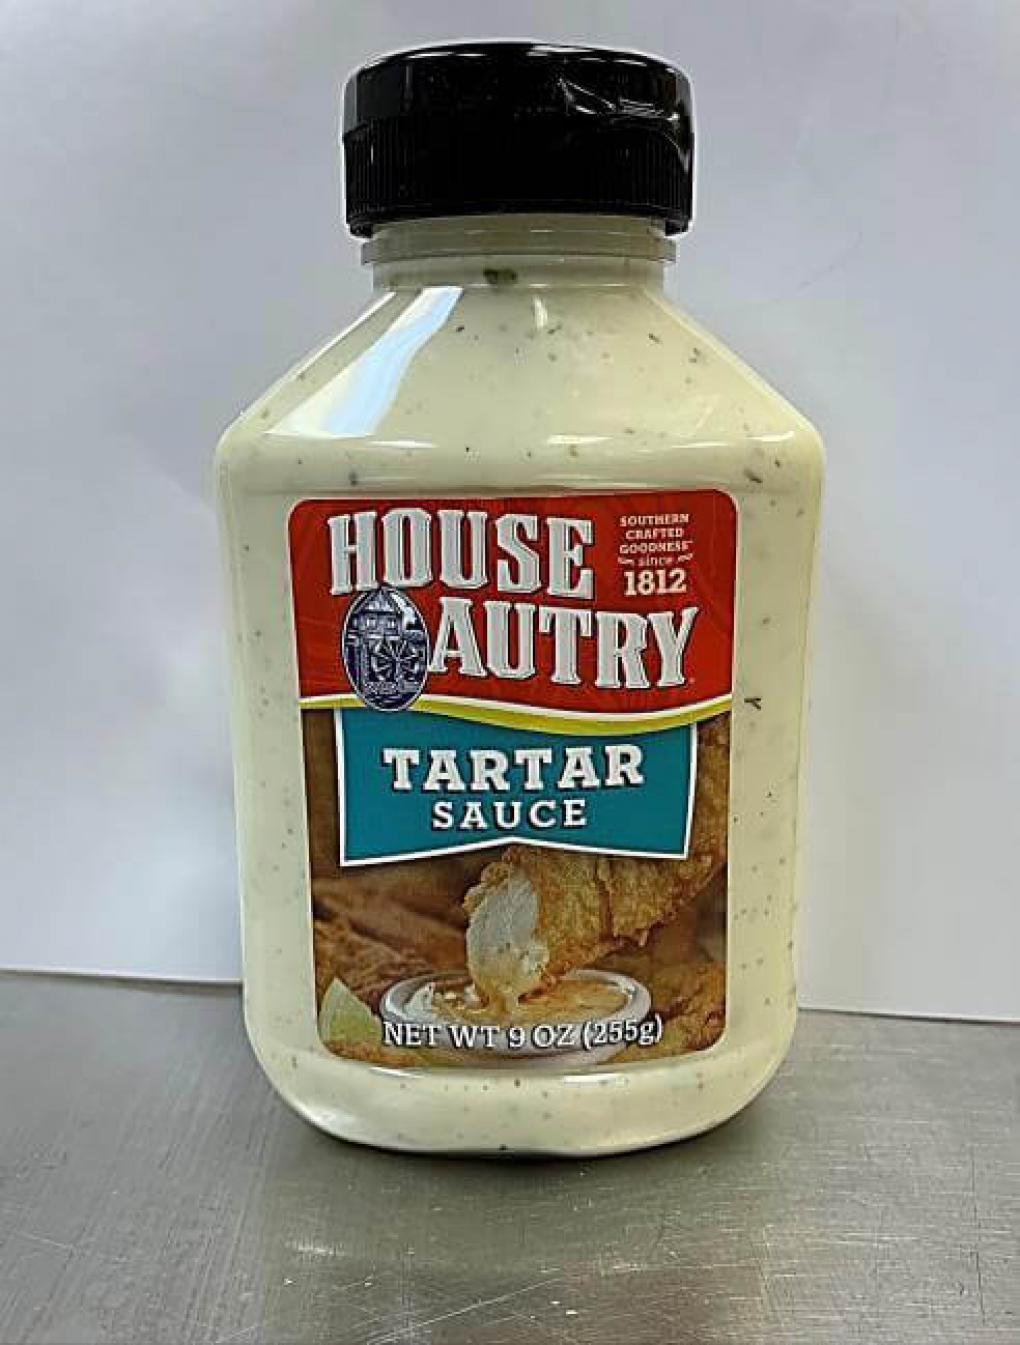 House-Autry Mills recall tartar sauce due to potential spoilage of product